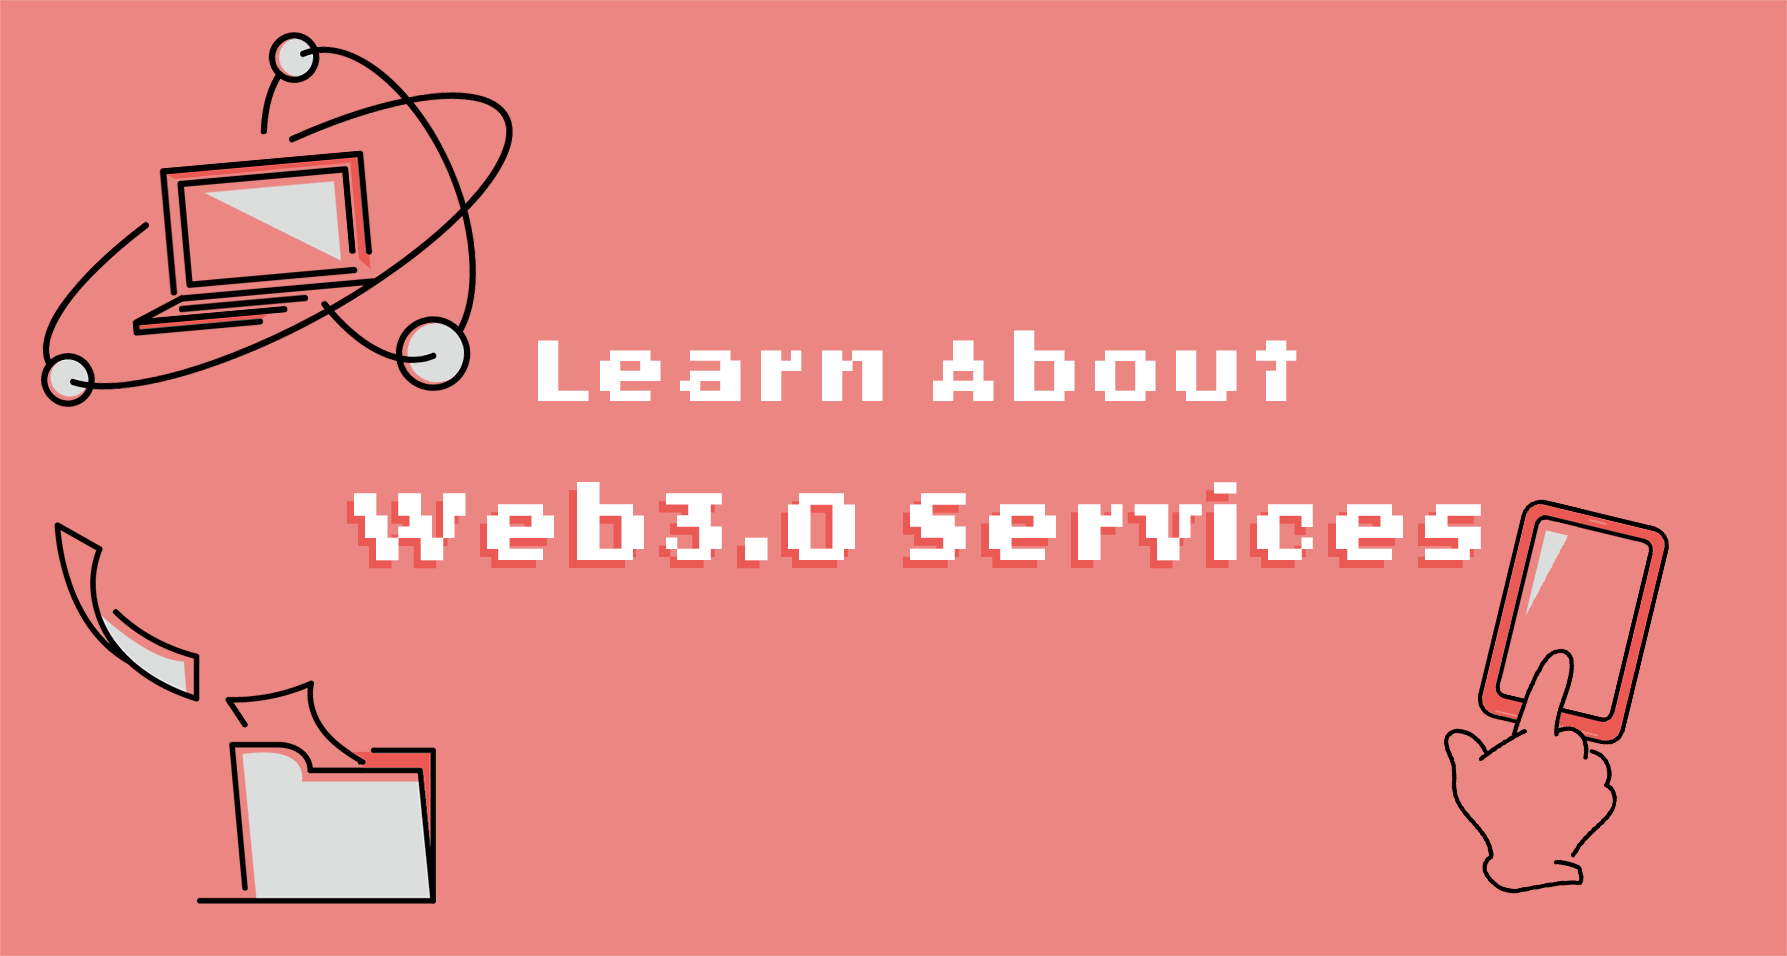 Learn about Web3.0 services